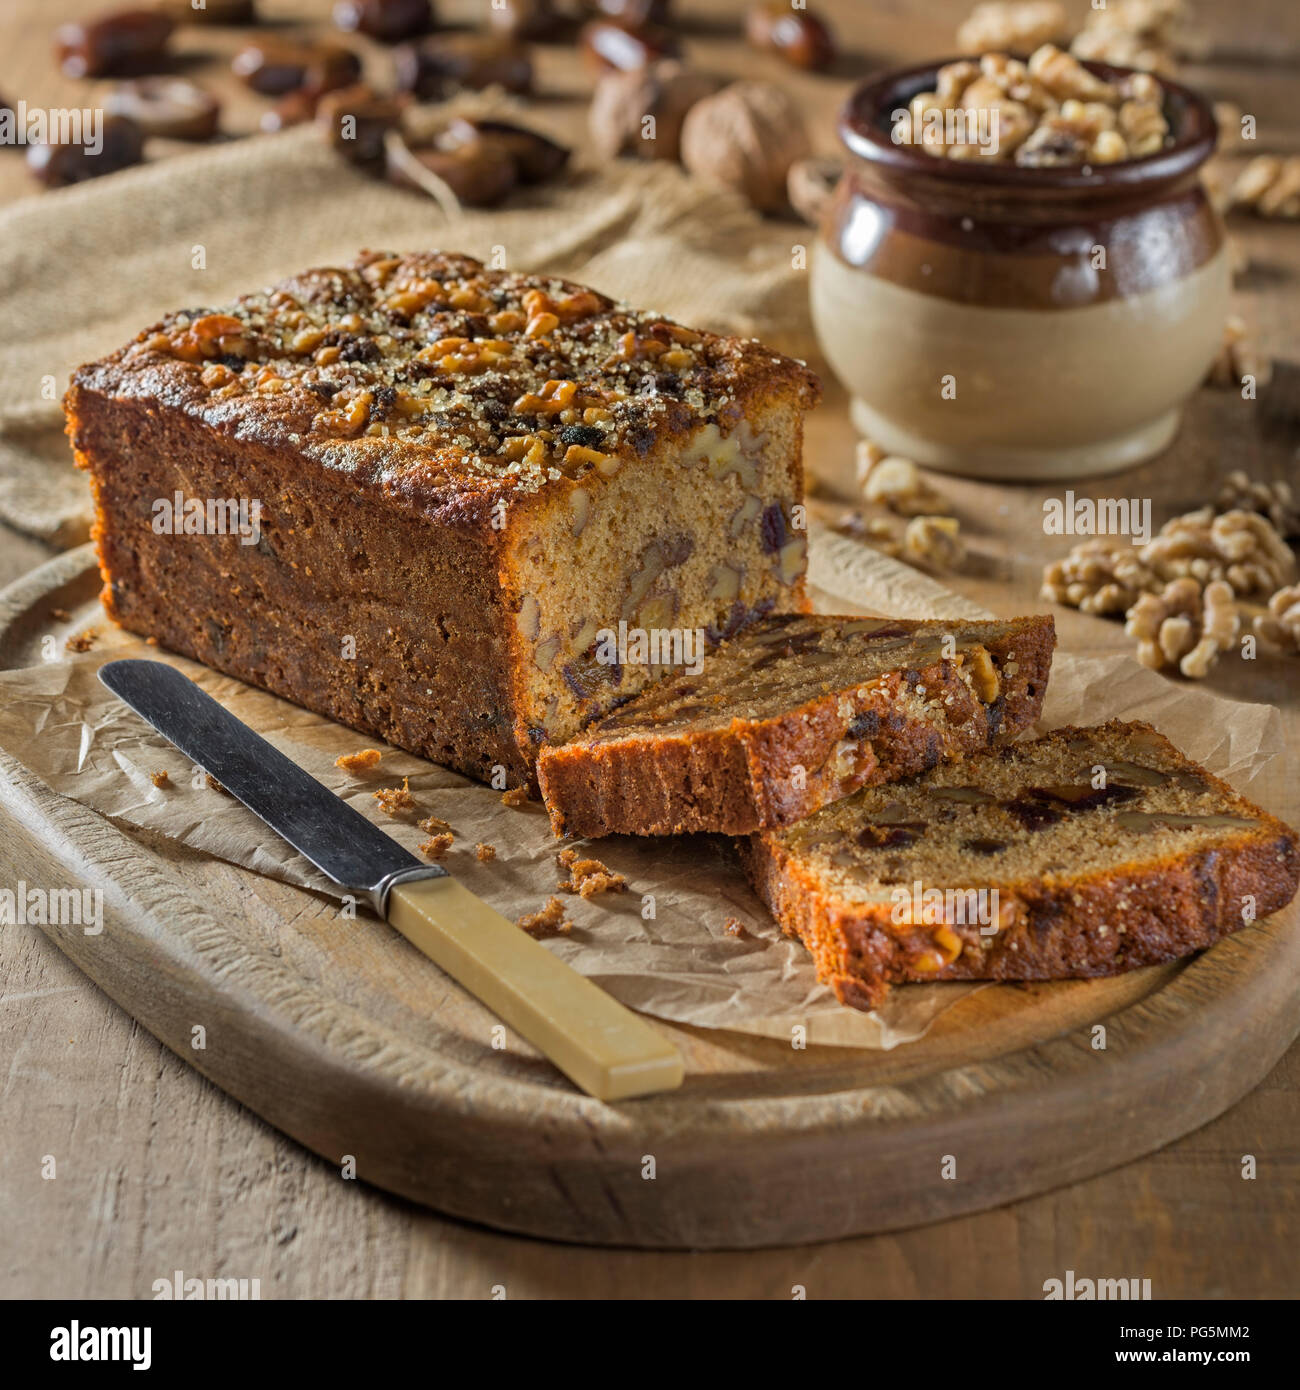 Date and walnut loaf. Stock Photo